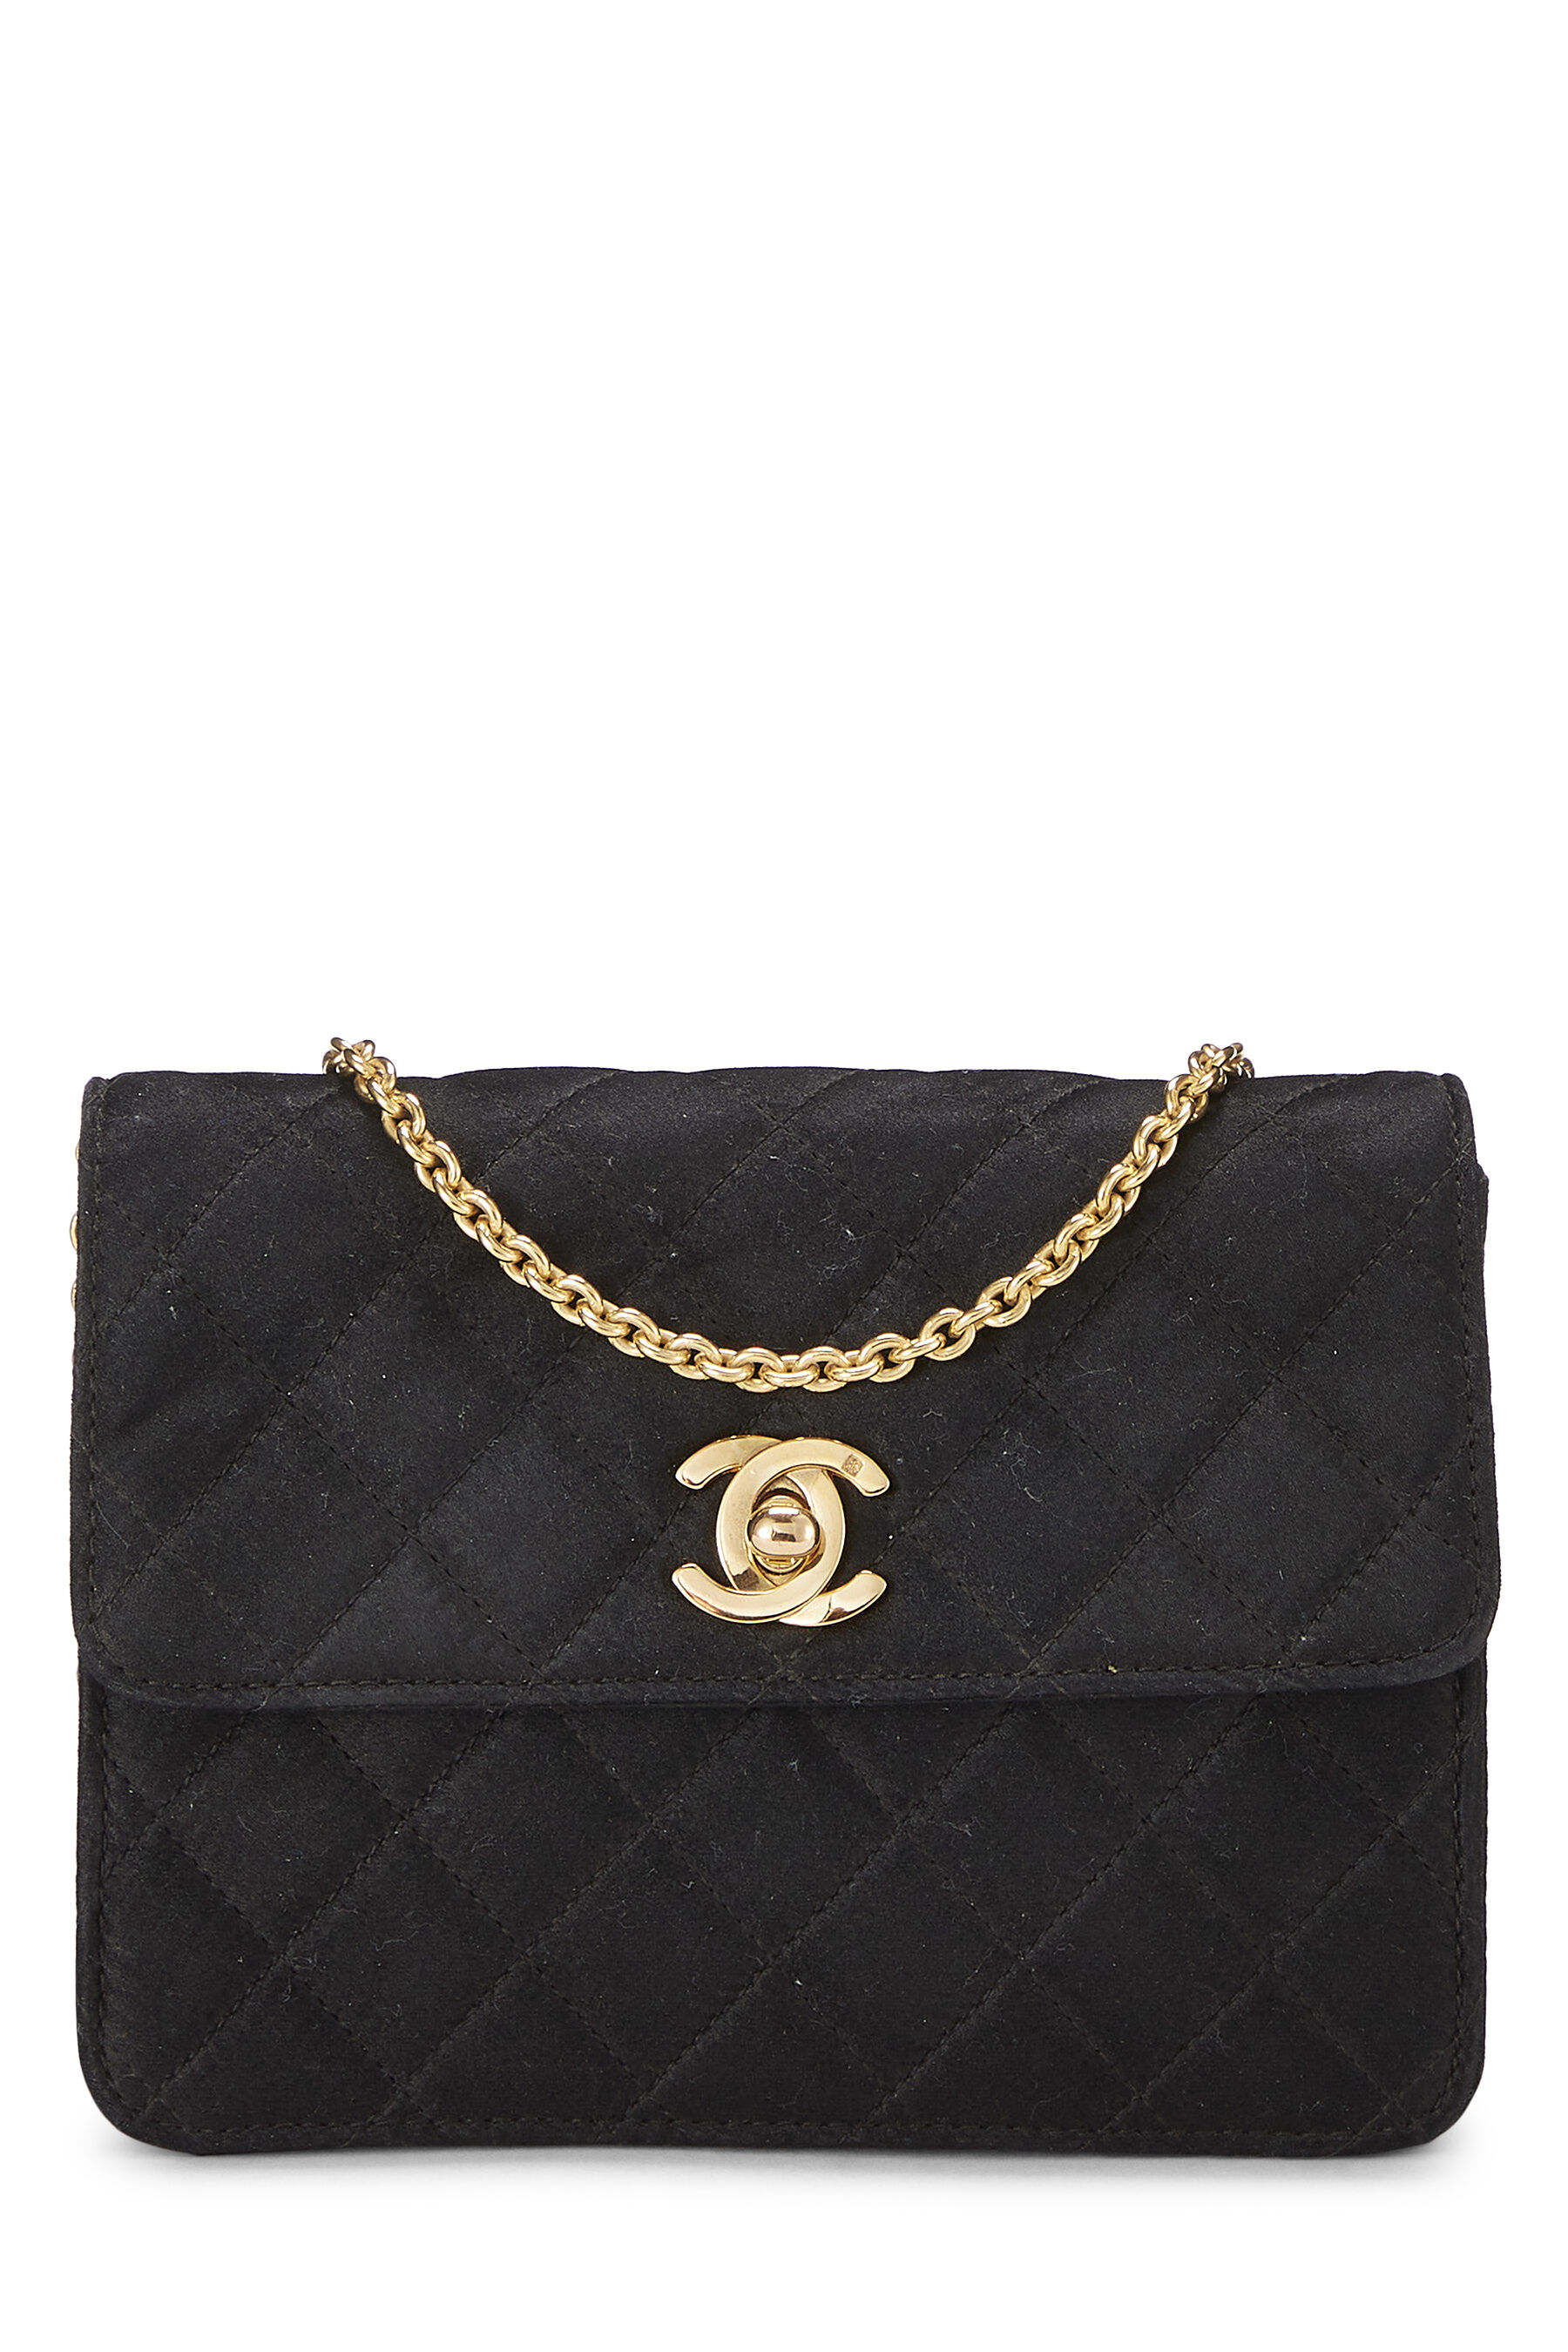 Chanel - Black Quilted Satin Half Flap Micro